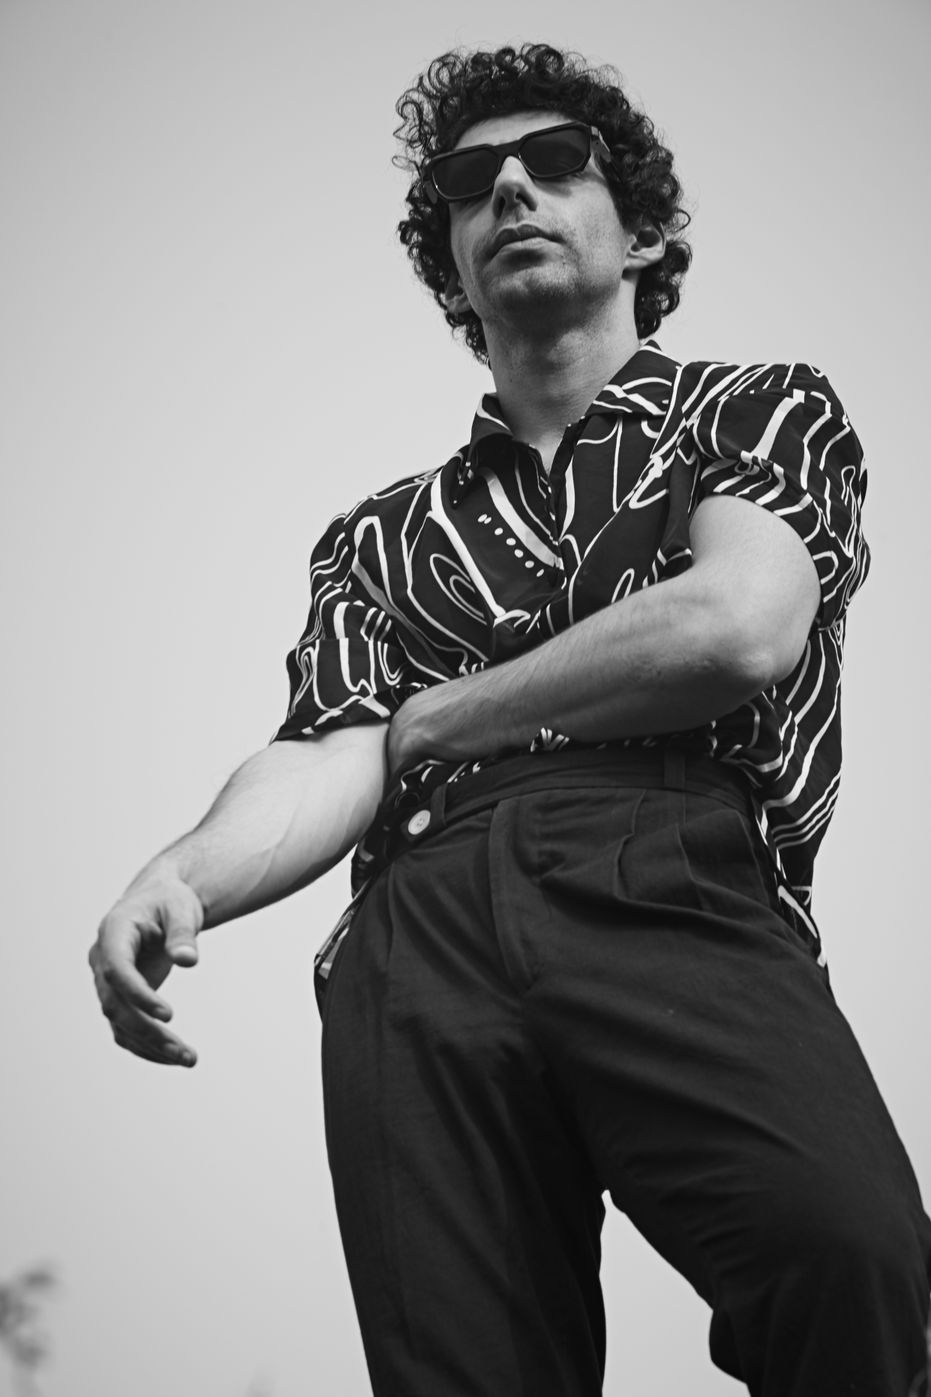 Photography series by Khushboo jain featuring jim sarbh for currentMood magazine